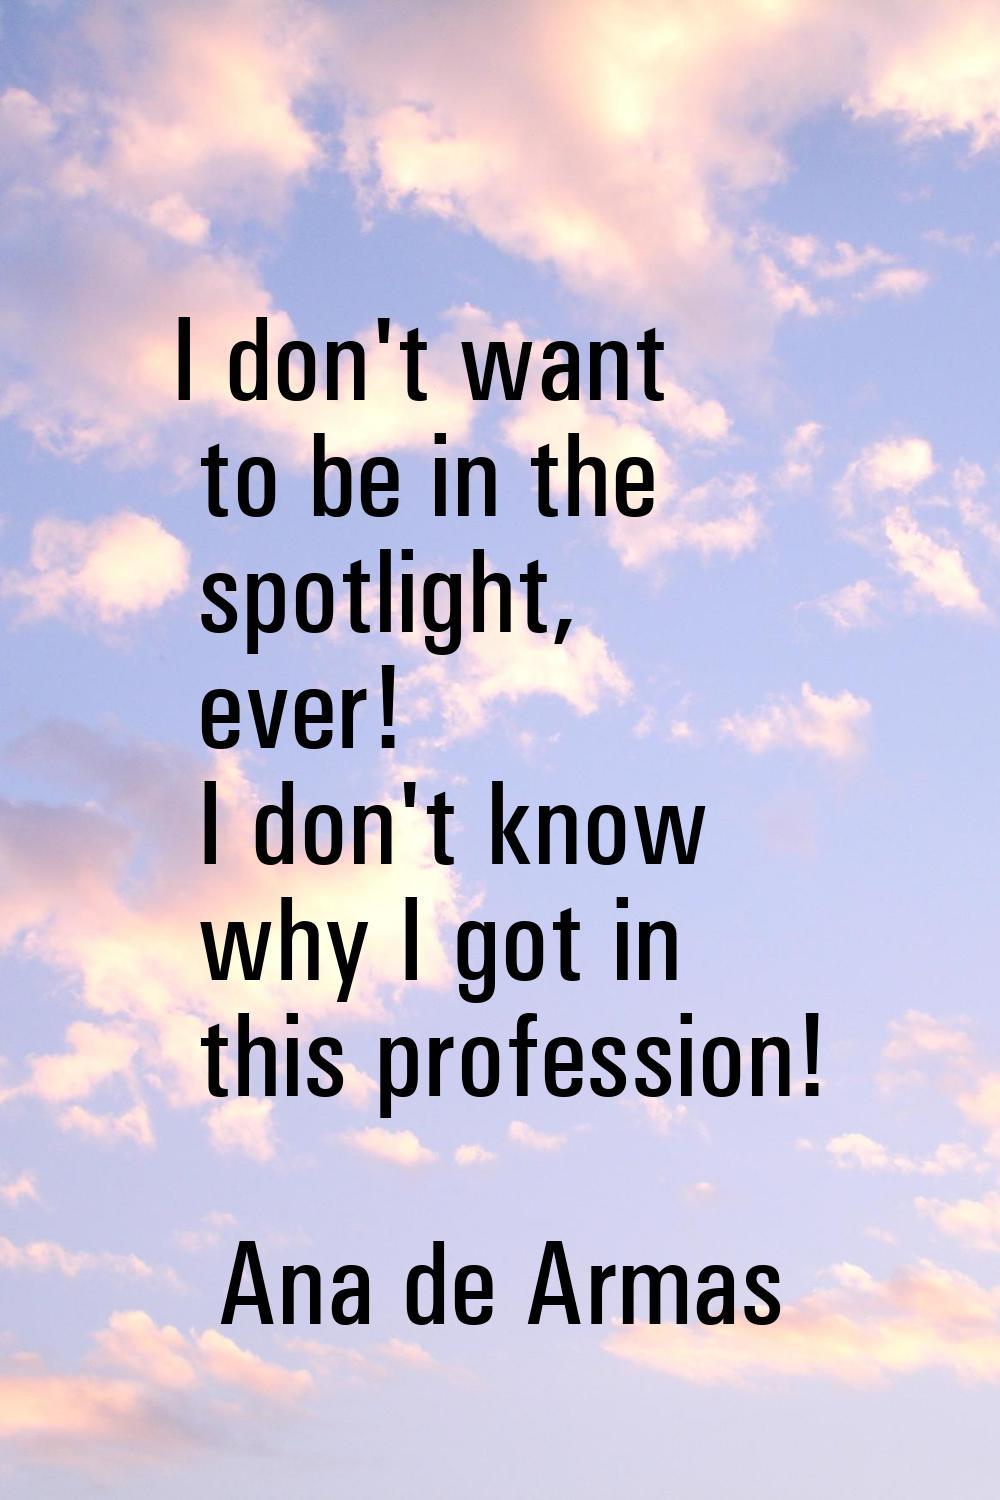 I don't want to be in the spotlight, ever! I don't know why I got in this profession!